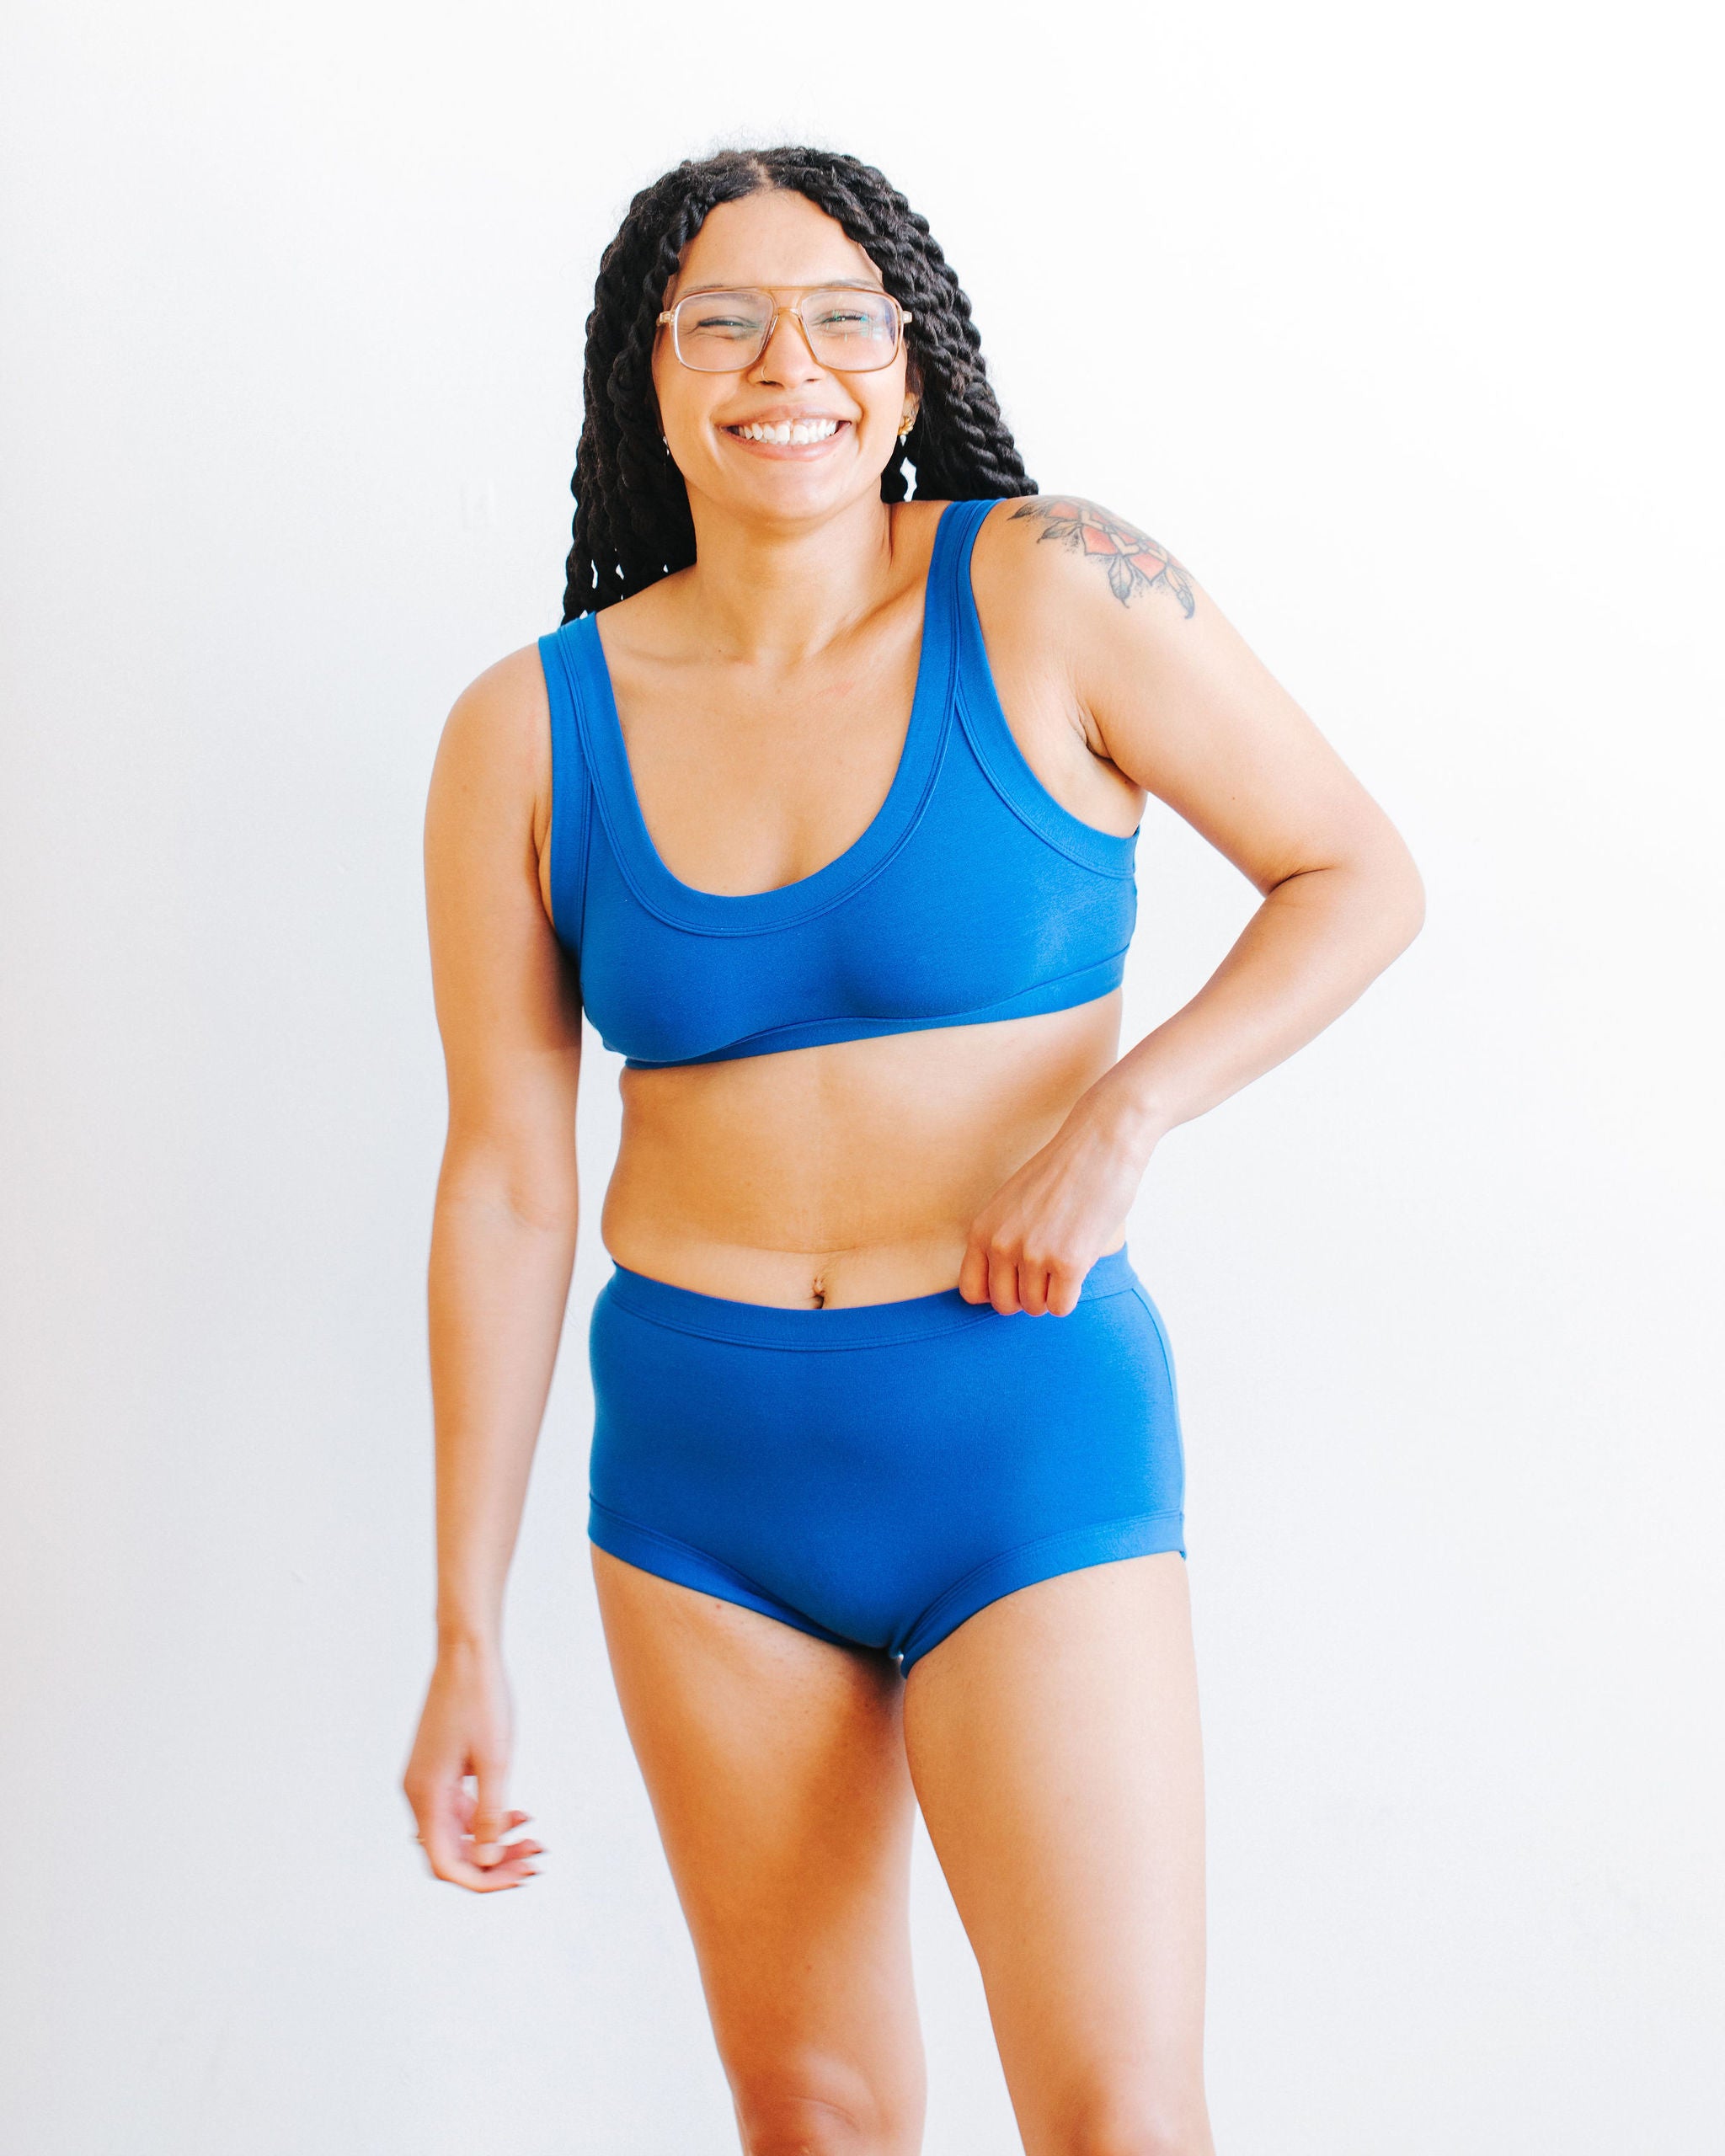 Model wearing Thunderpants Original style underwear and Bralette set in Blueberry Blue.